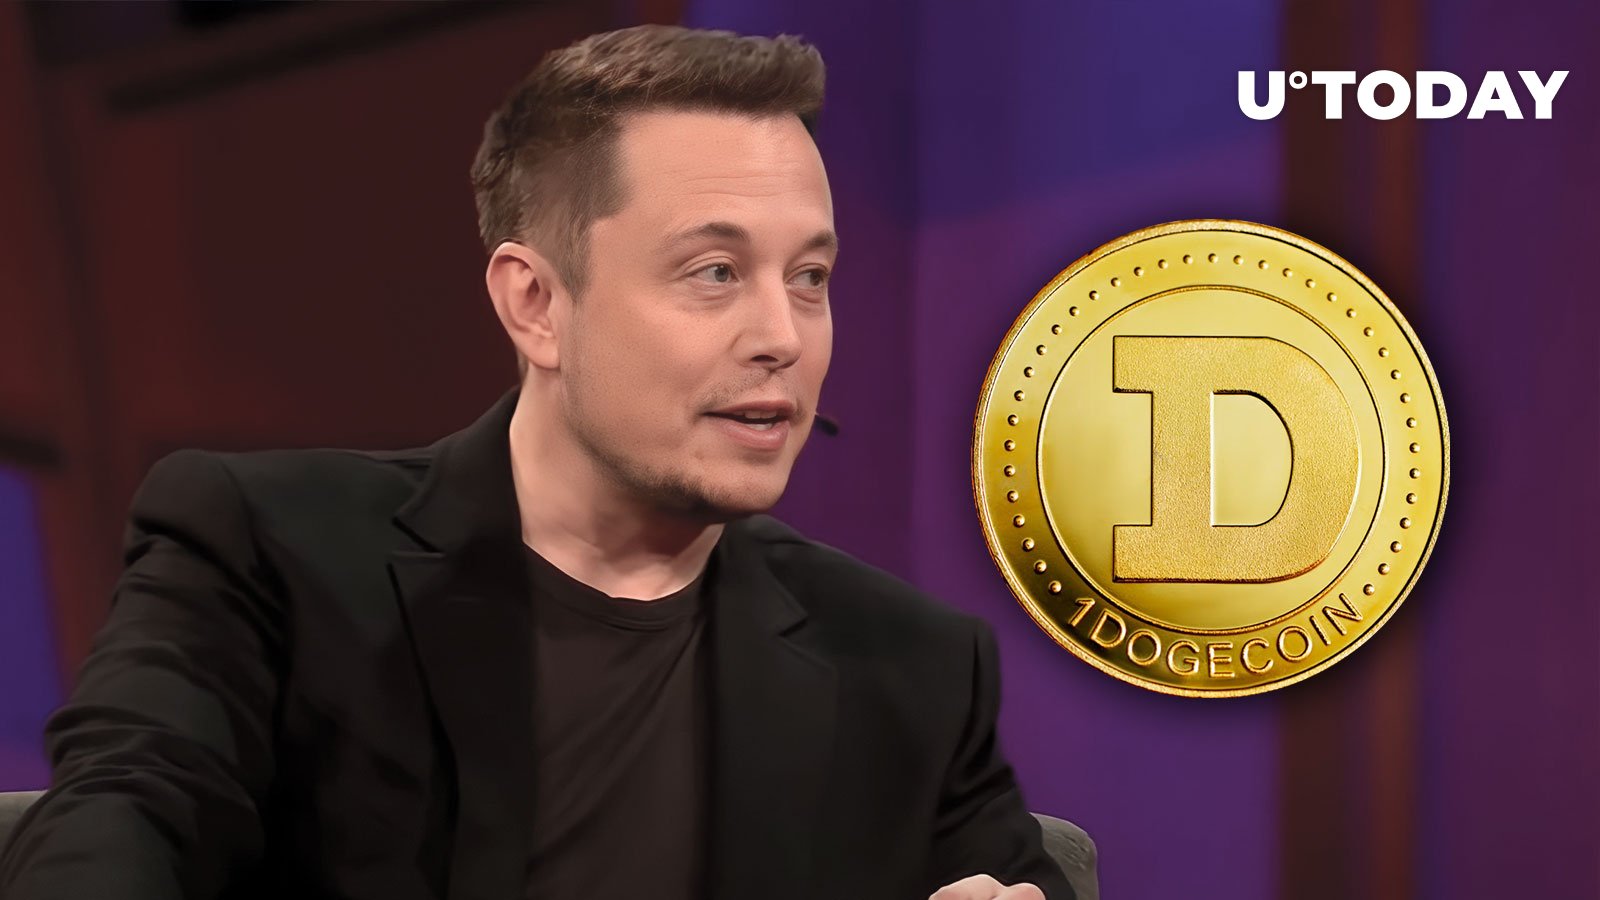 Elon Musk Reaffirms Support for Dogecoin, DOGE Price Rallies